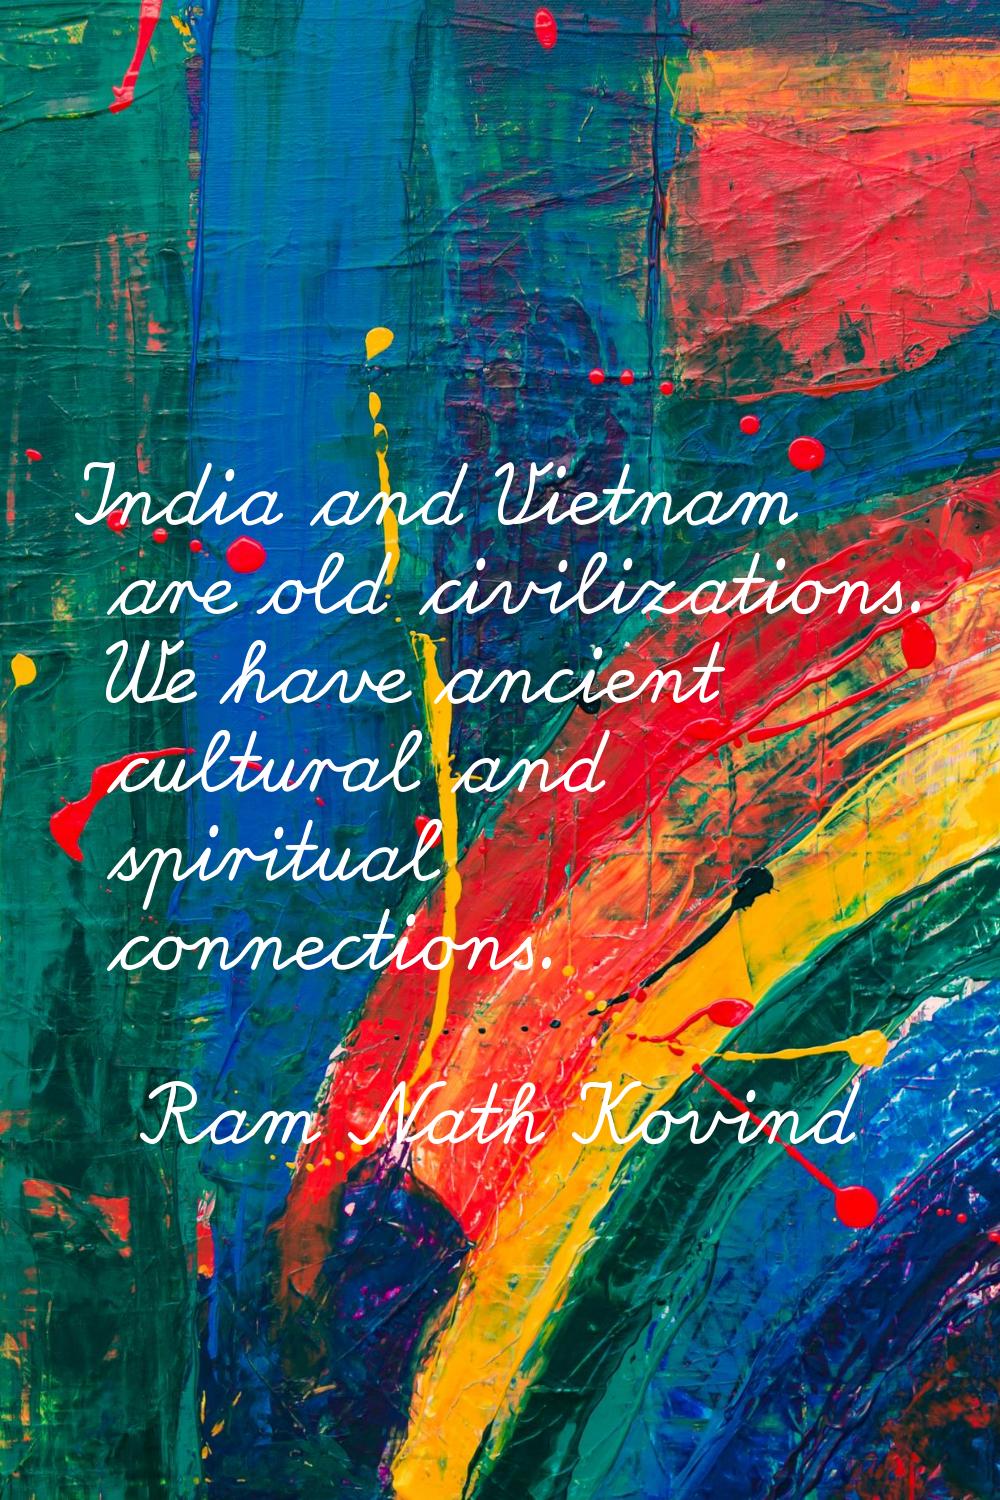 India and Vietnam are old civilizations. We have ancient cultural and spiritual connections.